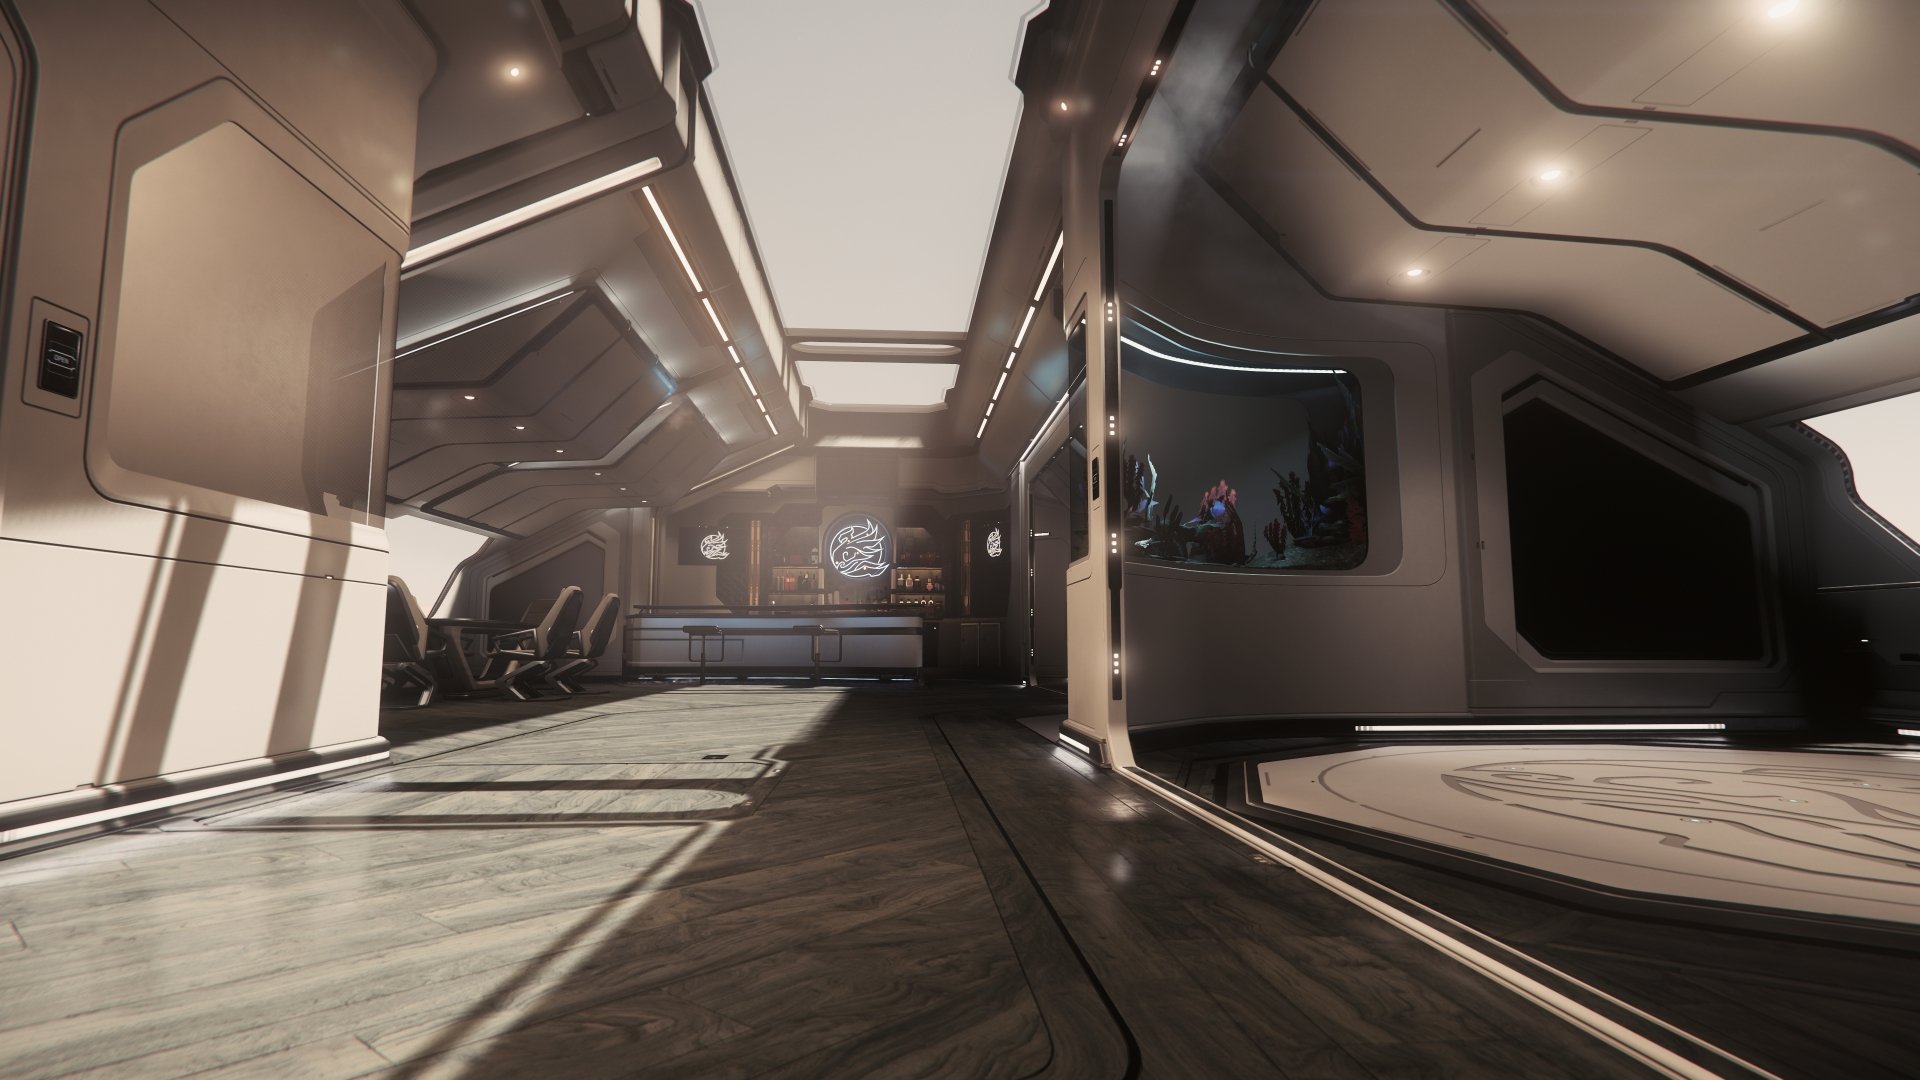 download a call to arms star citizen